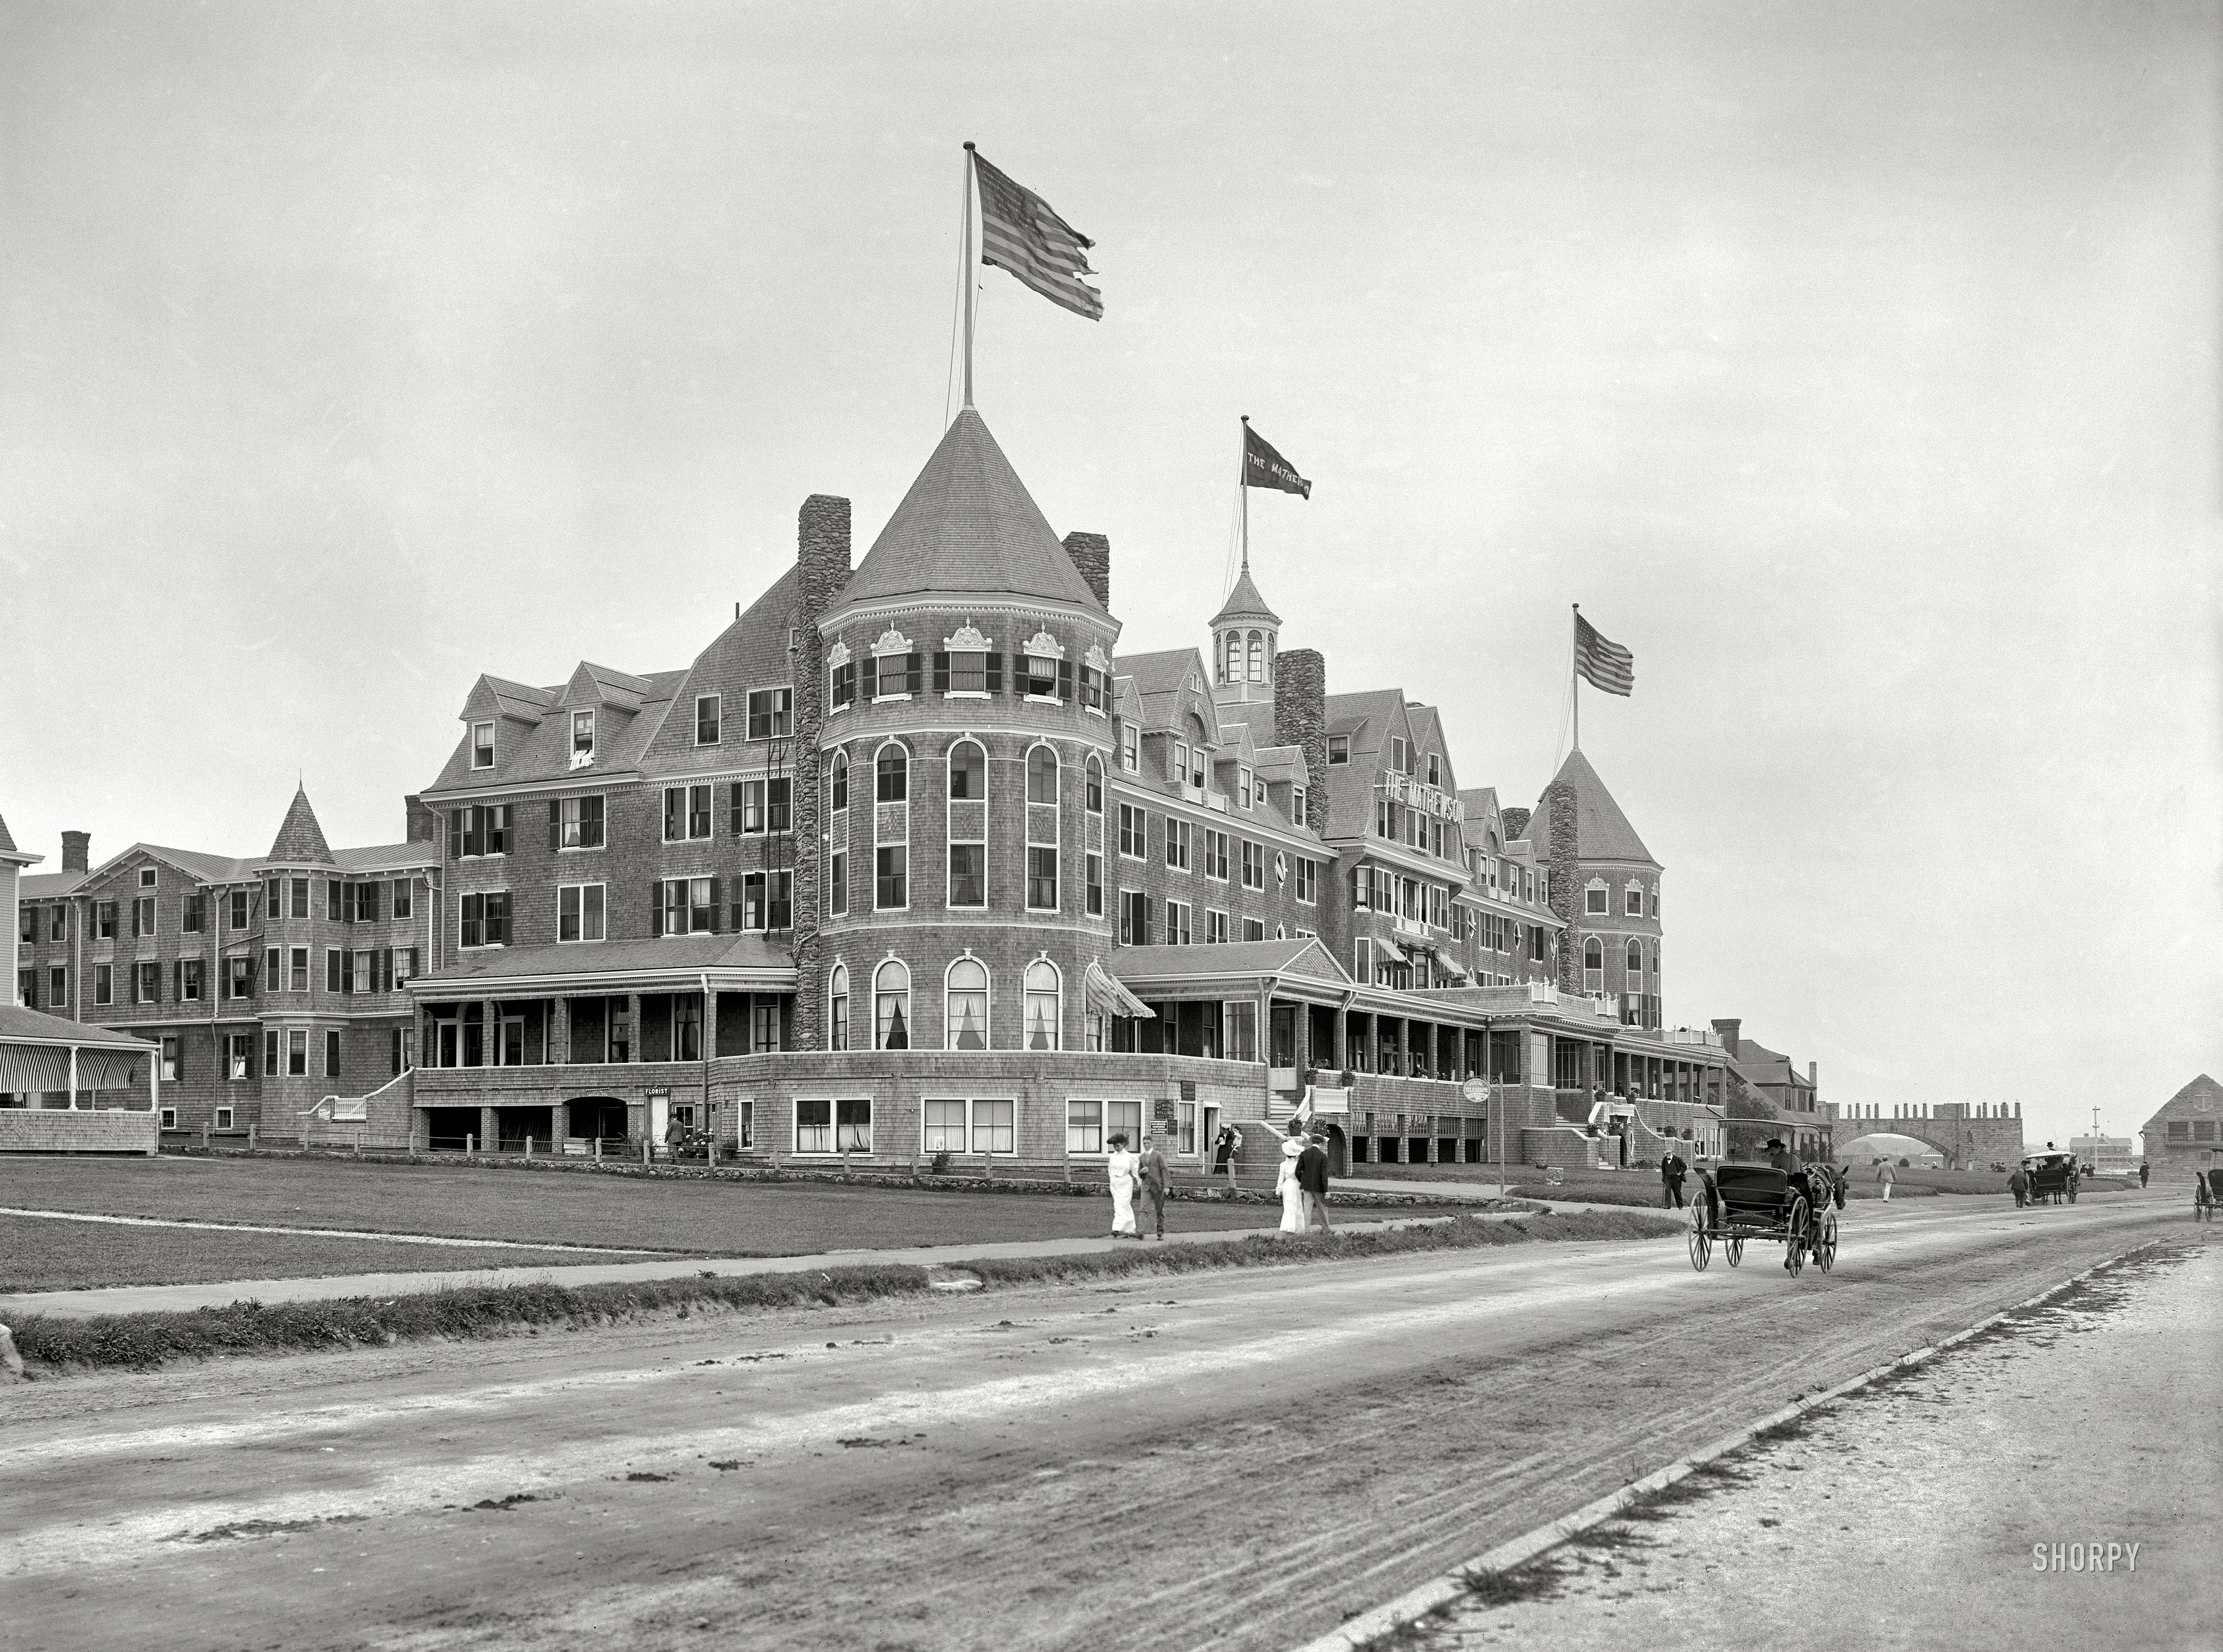 Narragansett Pier, Rhode Island, circa 1910. "Hotel (New) Mathewson." For many years the pre-eminent lodging in the "City of Hotels." View full size.